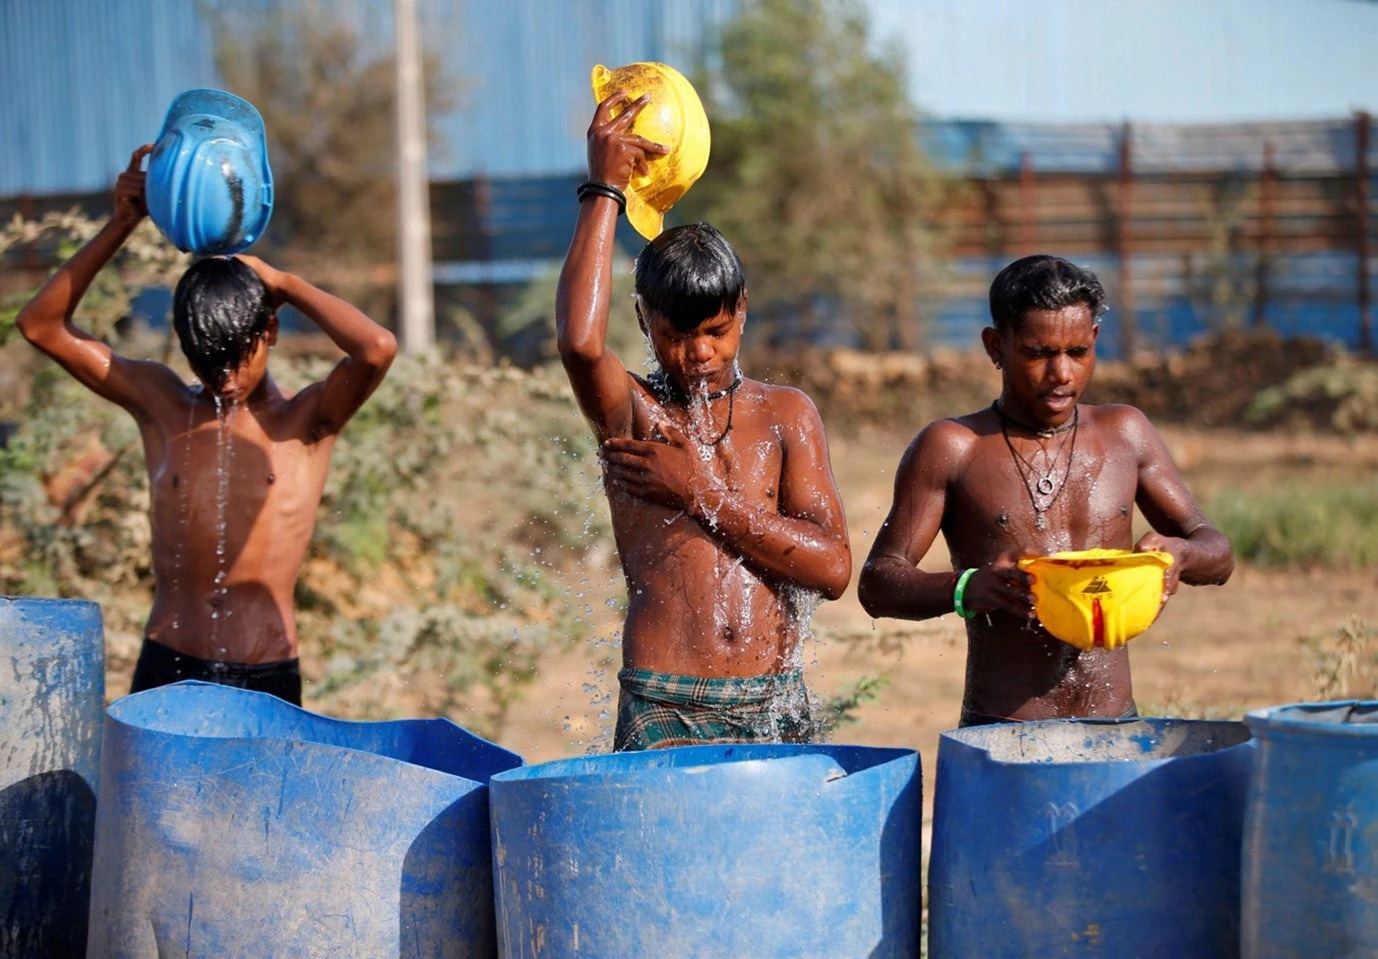 Workers at a construction site on the outskirts of Ahmedabad, India, try to cool themselves during the record-breaking heatwave earlier this year. Photo: Amit Dave / Alamy)